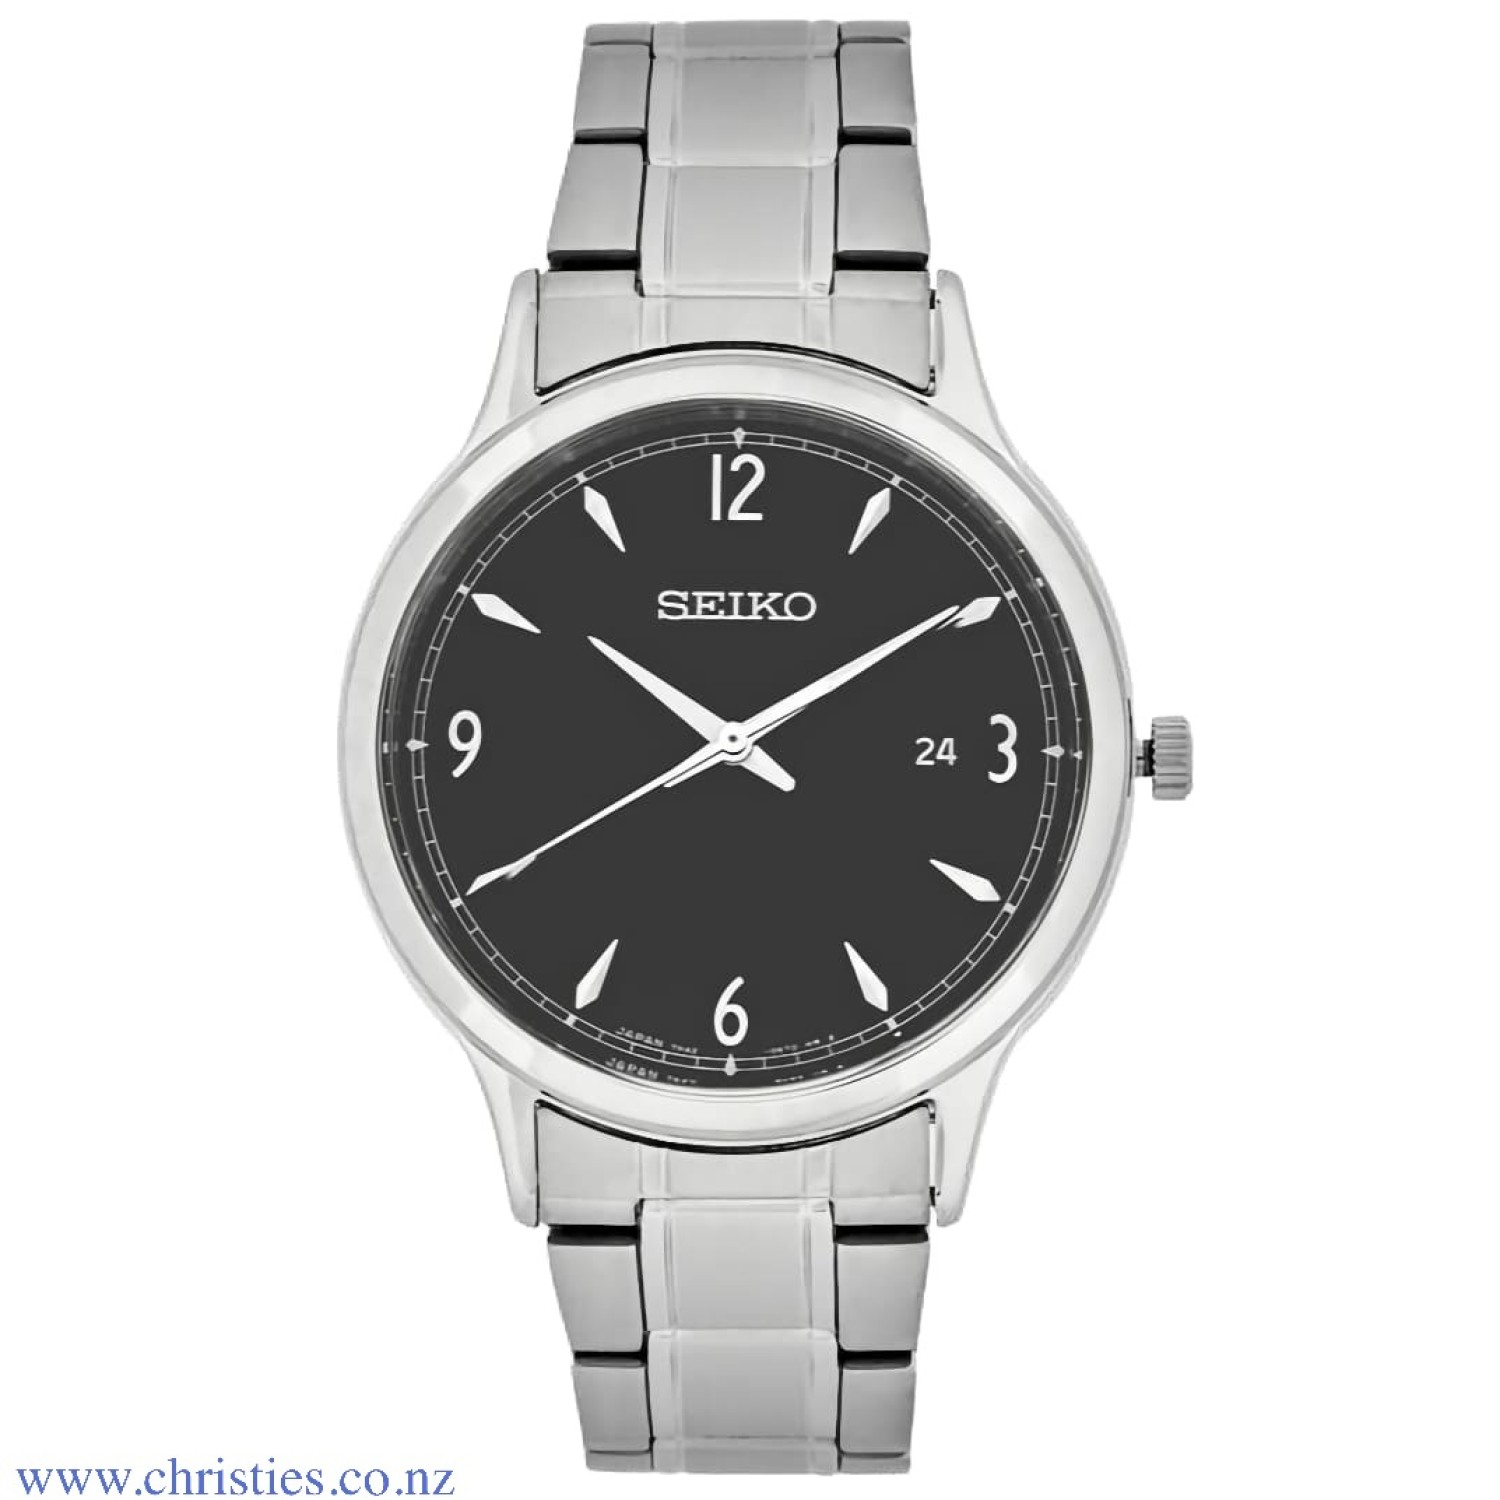 SGEH81J Seiko Mens Conceptual Series Watch. A classic timepiece with a sleek appeal and everyday functionality, this watch is an effortless way to elevate your look. The simple black dial contrasts with a stainless steel case and bracelet to provide a sea